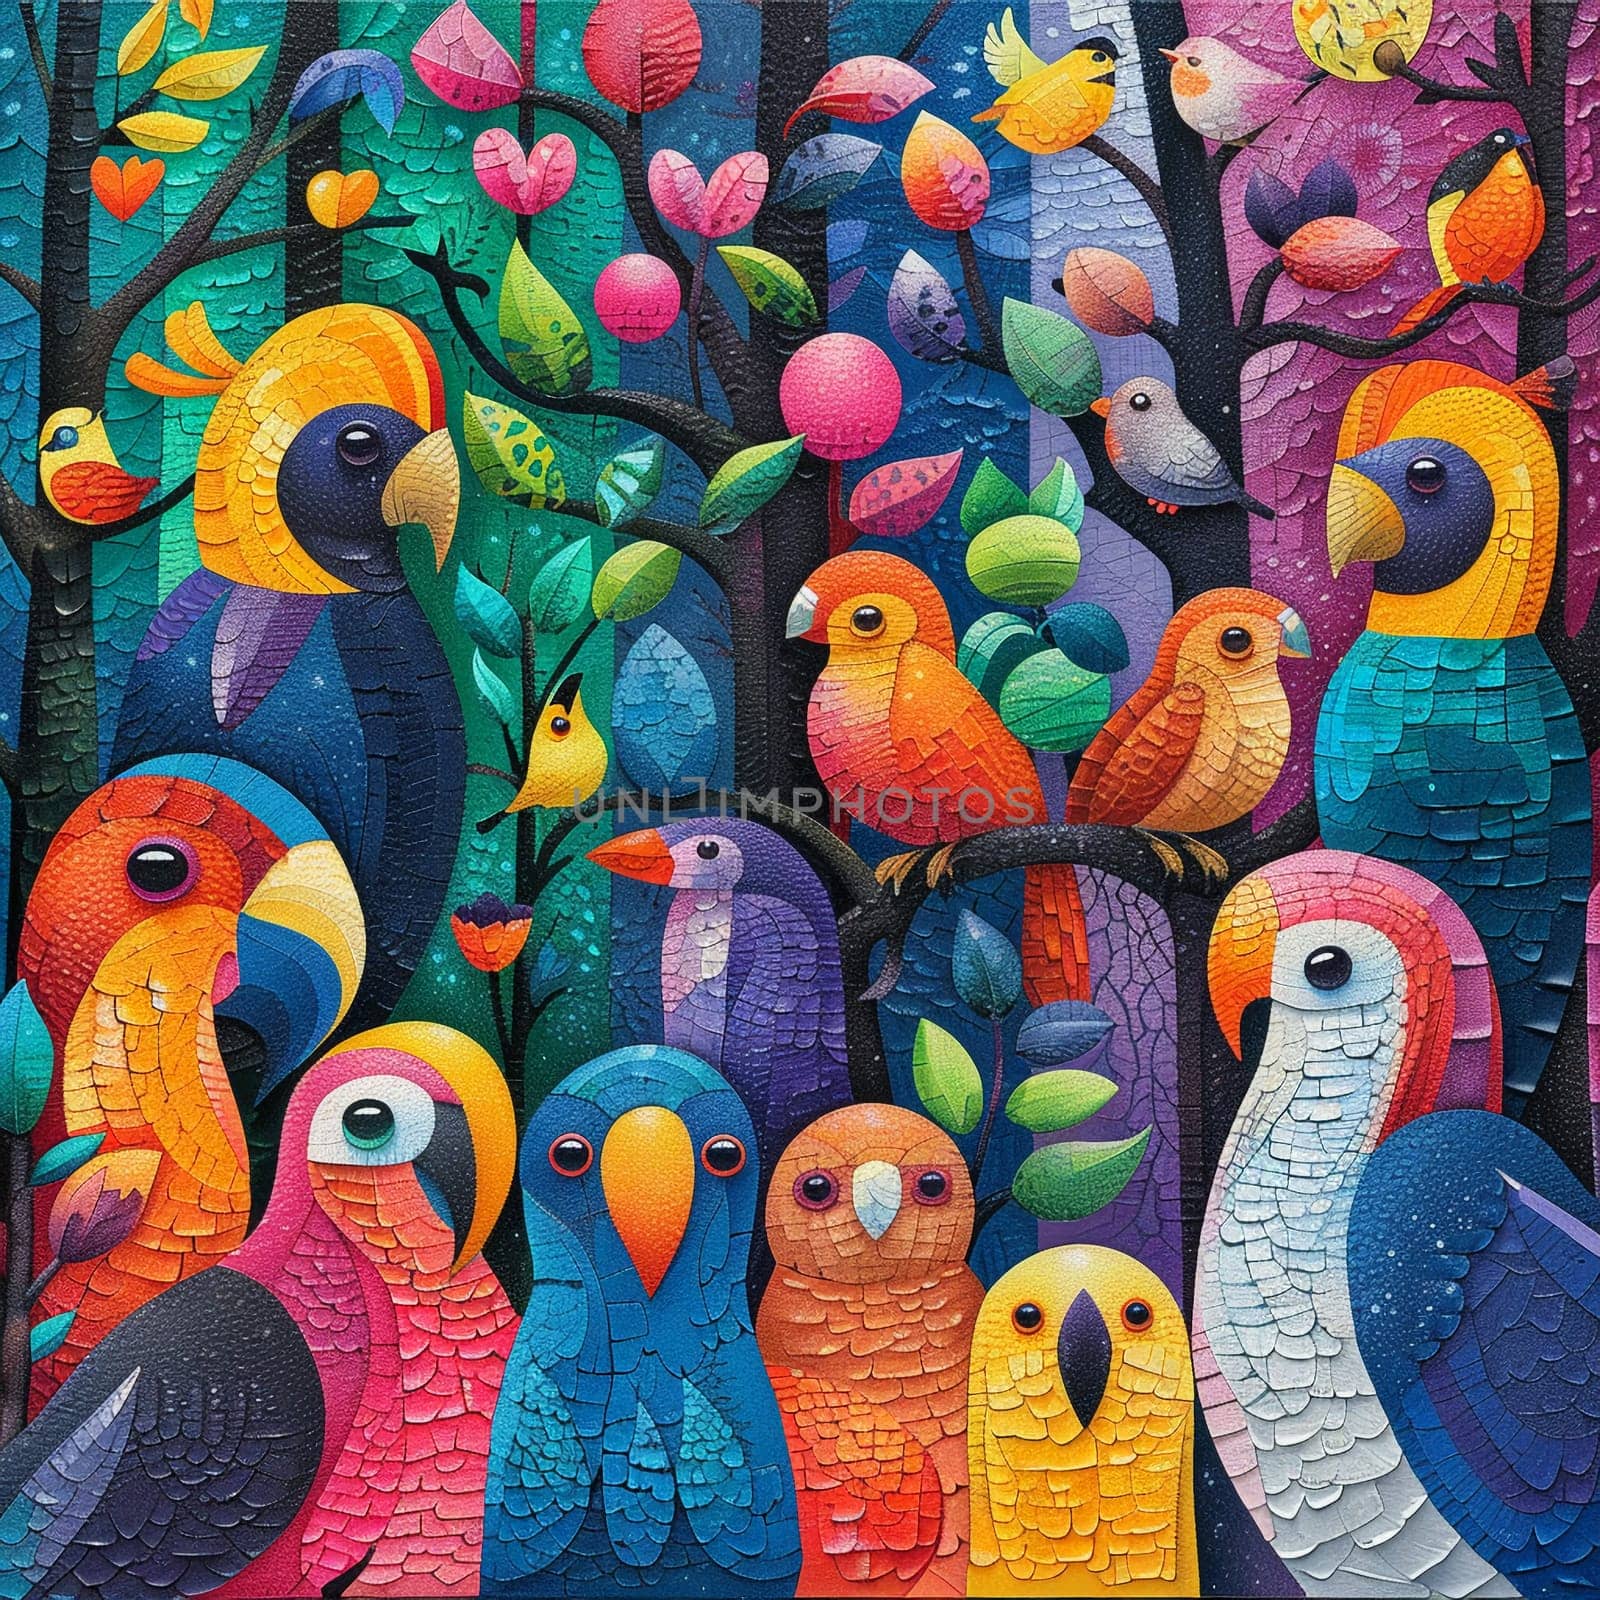 Abstract illustration of animals coming together in colorful forest by Benzoix